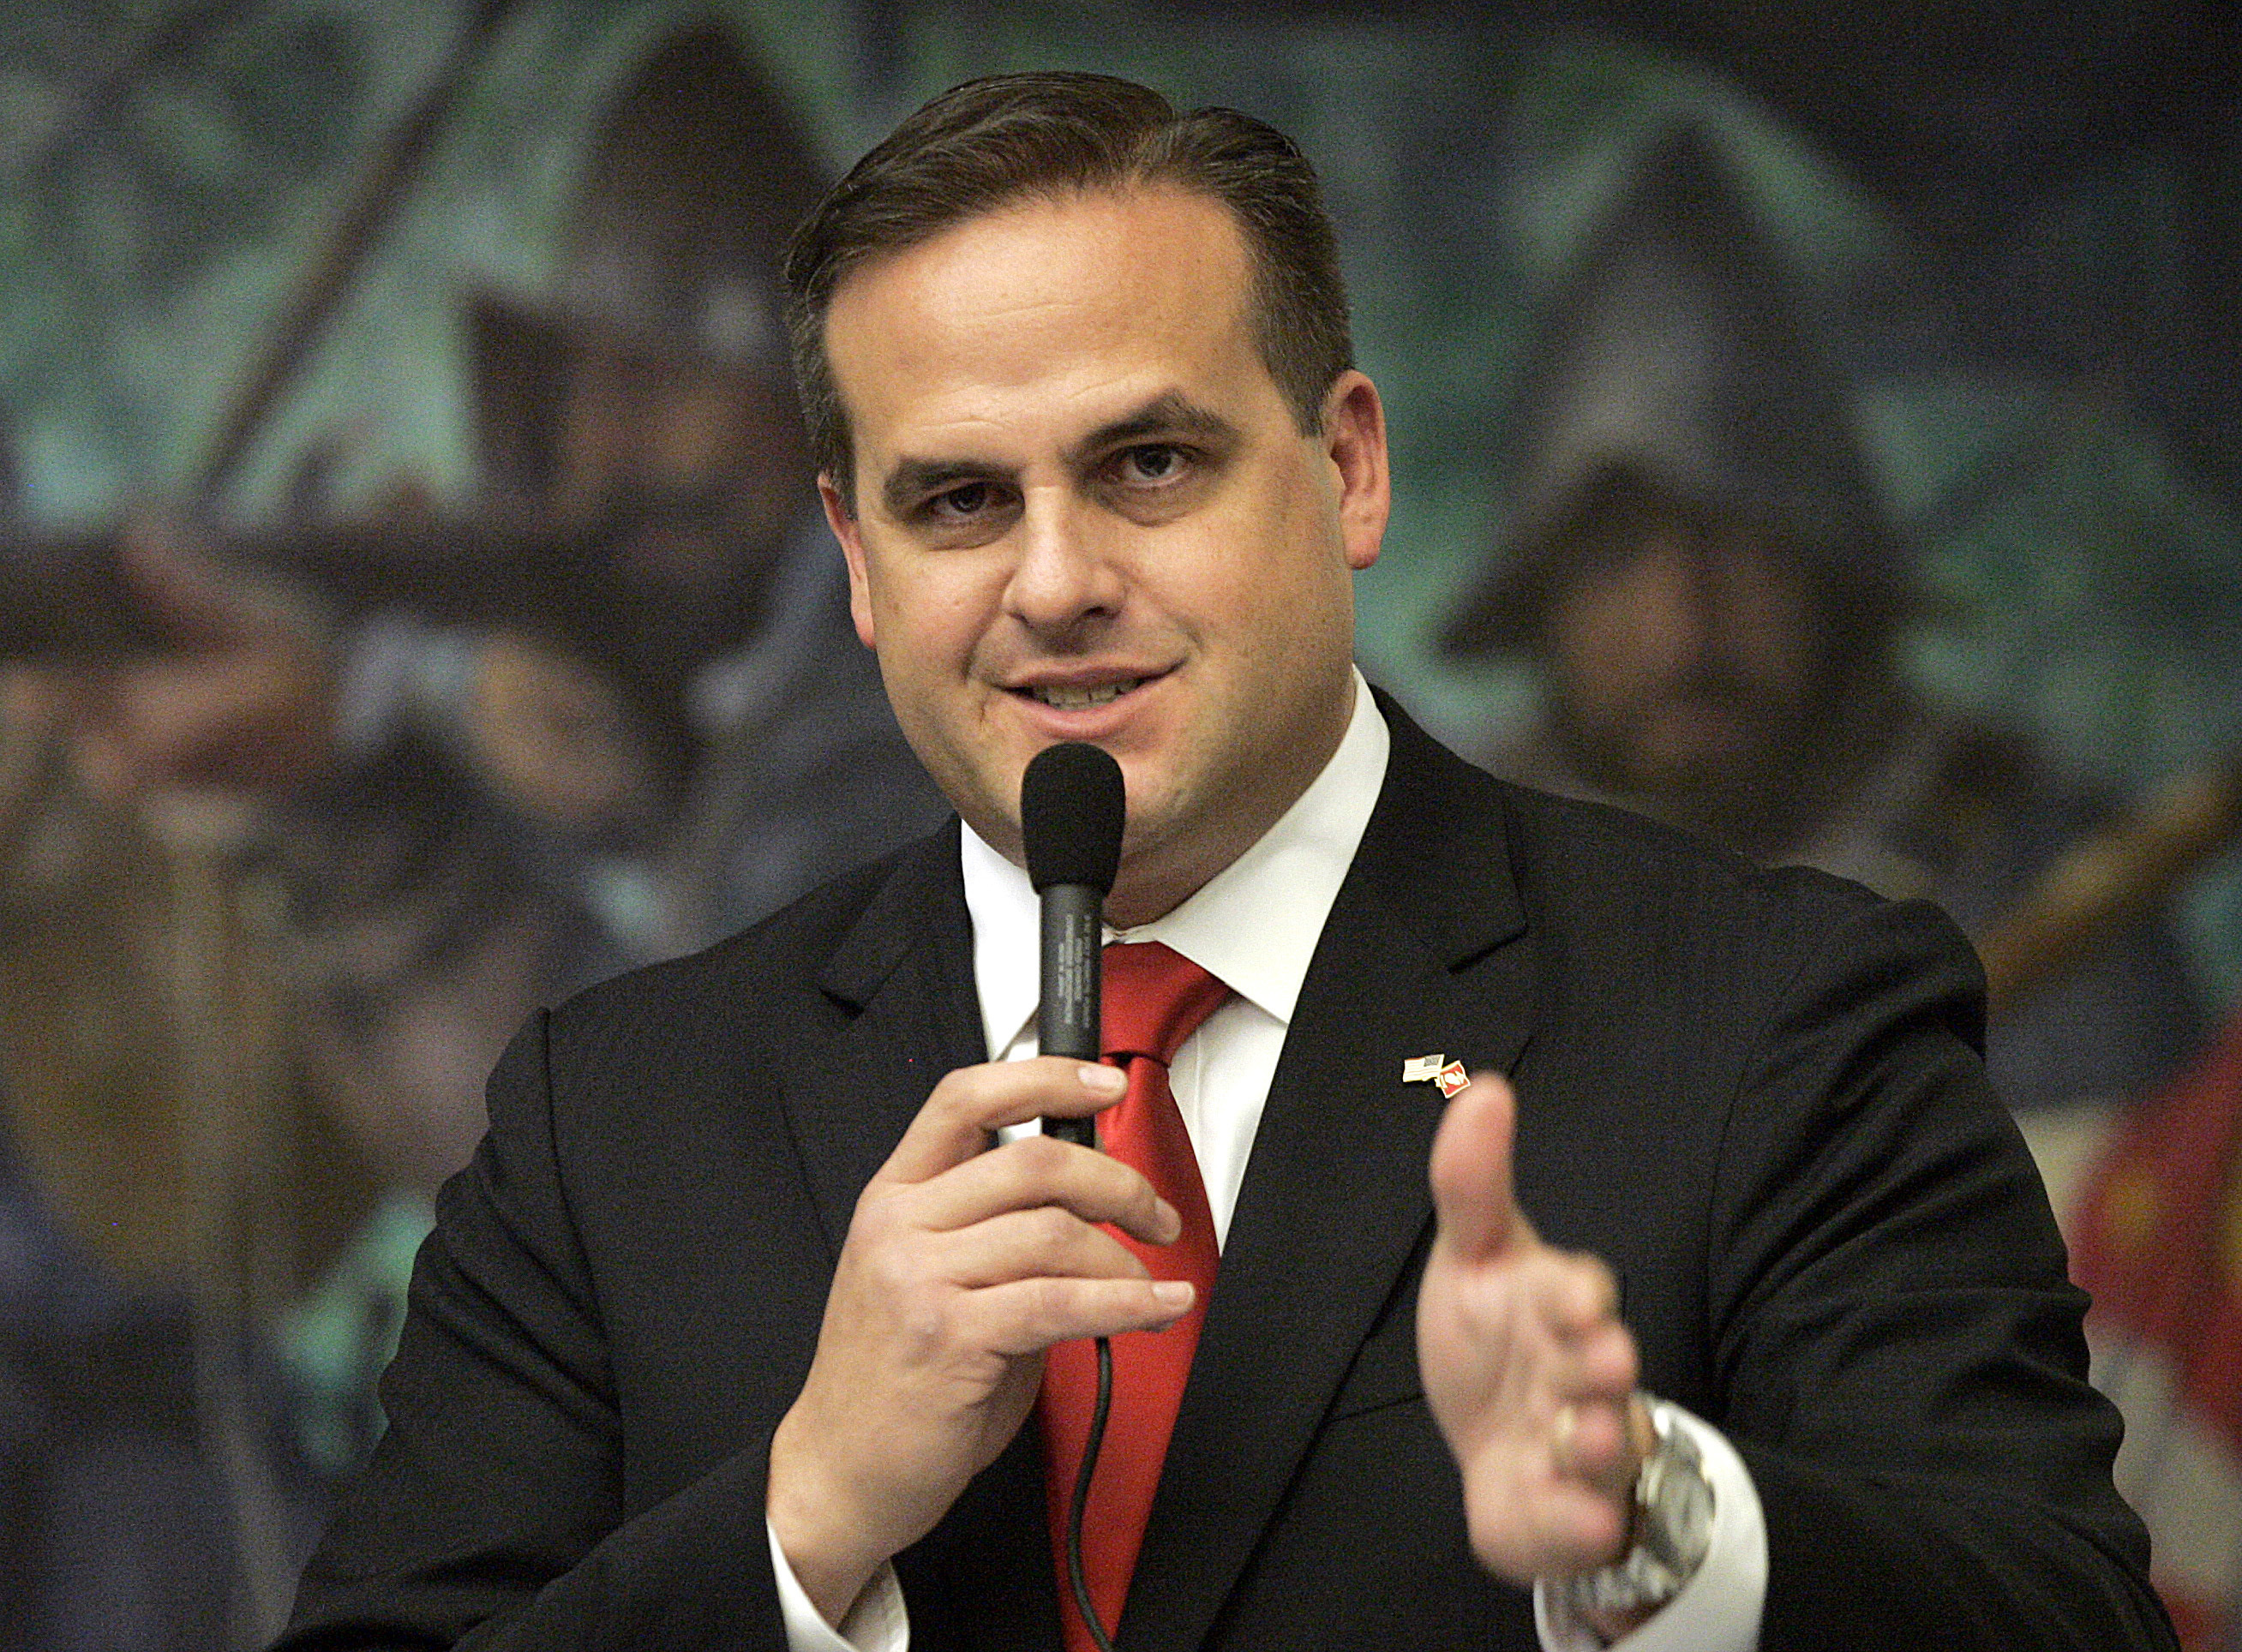 Republican state senator Frank Artiles asking a question about a pip insurance bill during house session in Tallahassee, FL, on March 9, 2012. (Steve Cannon—AP)